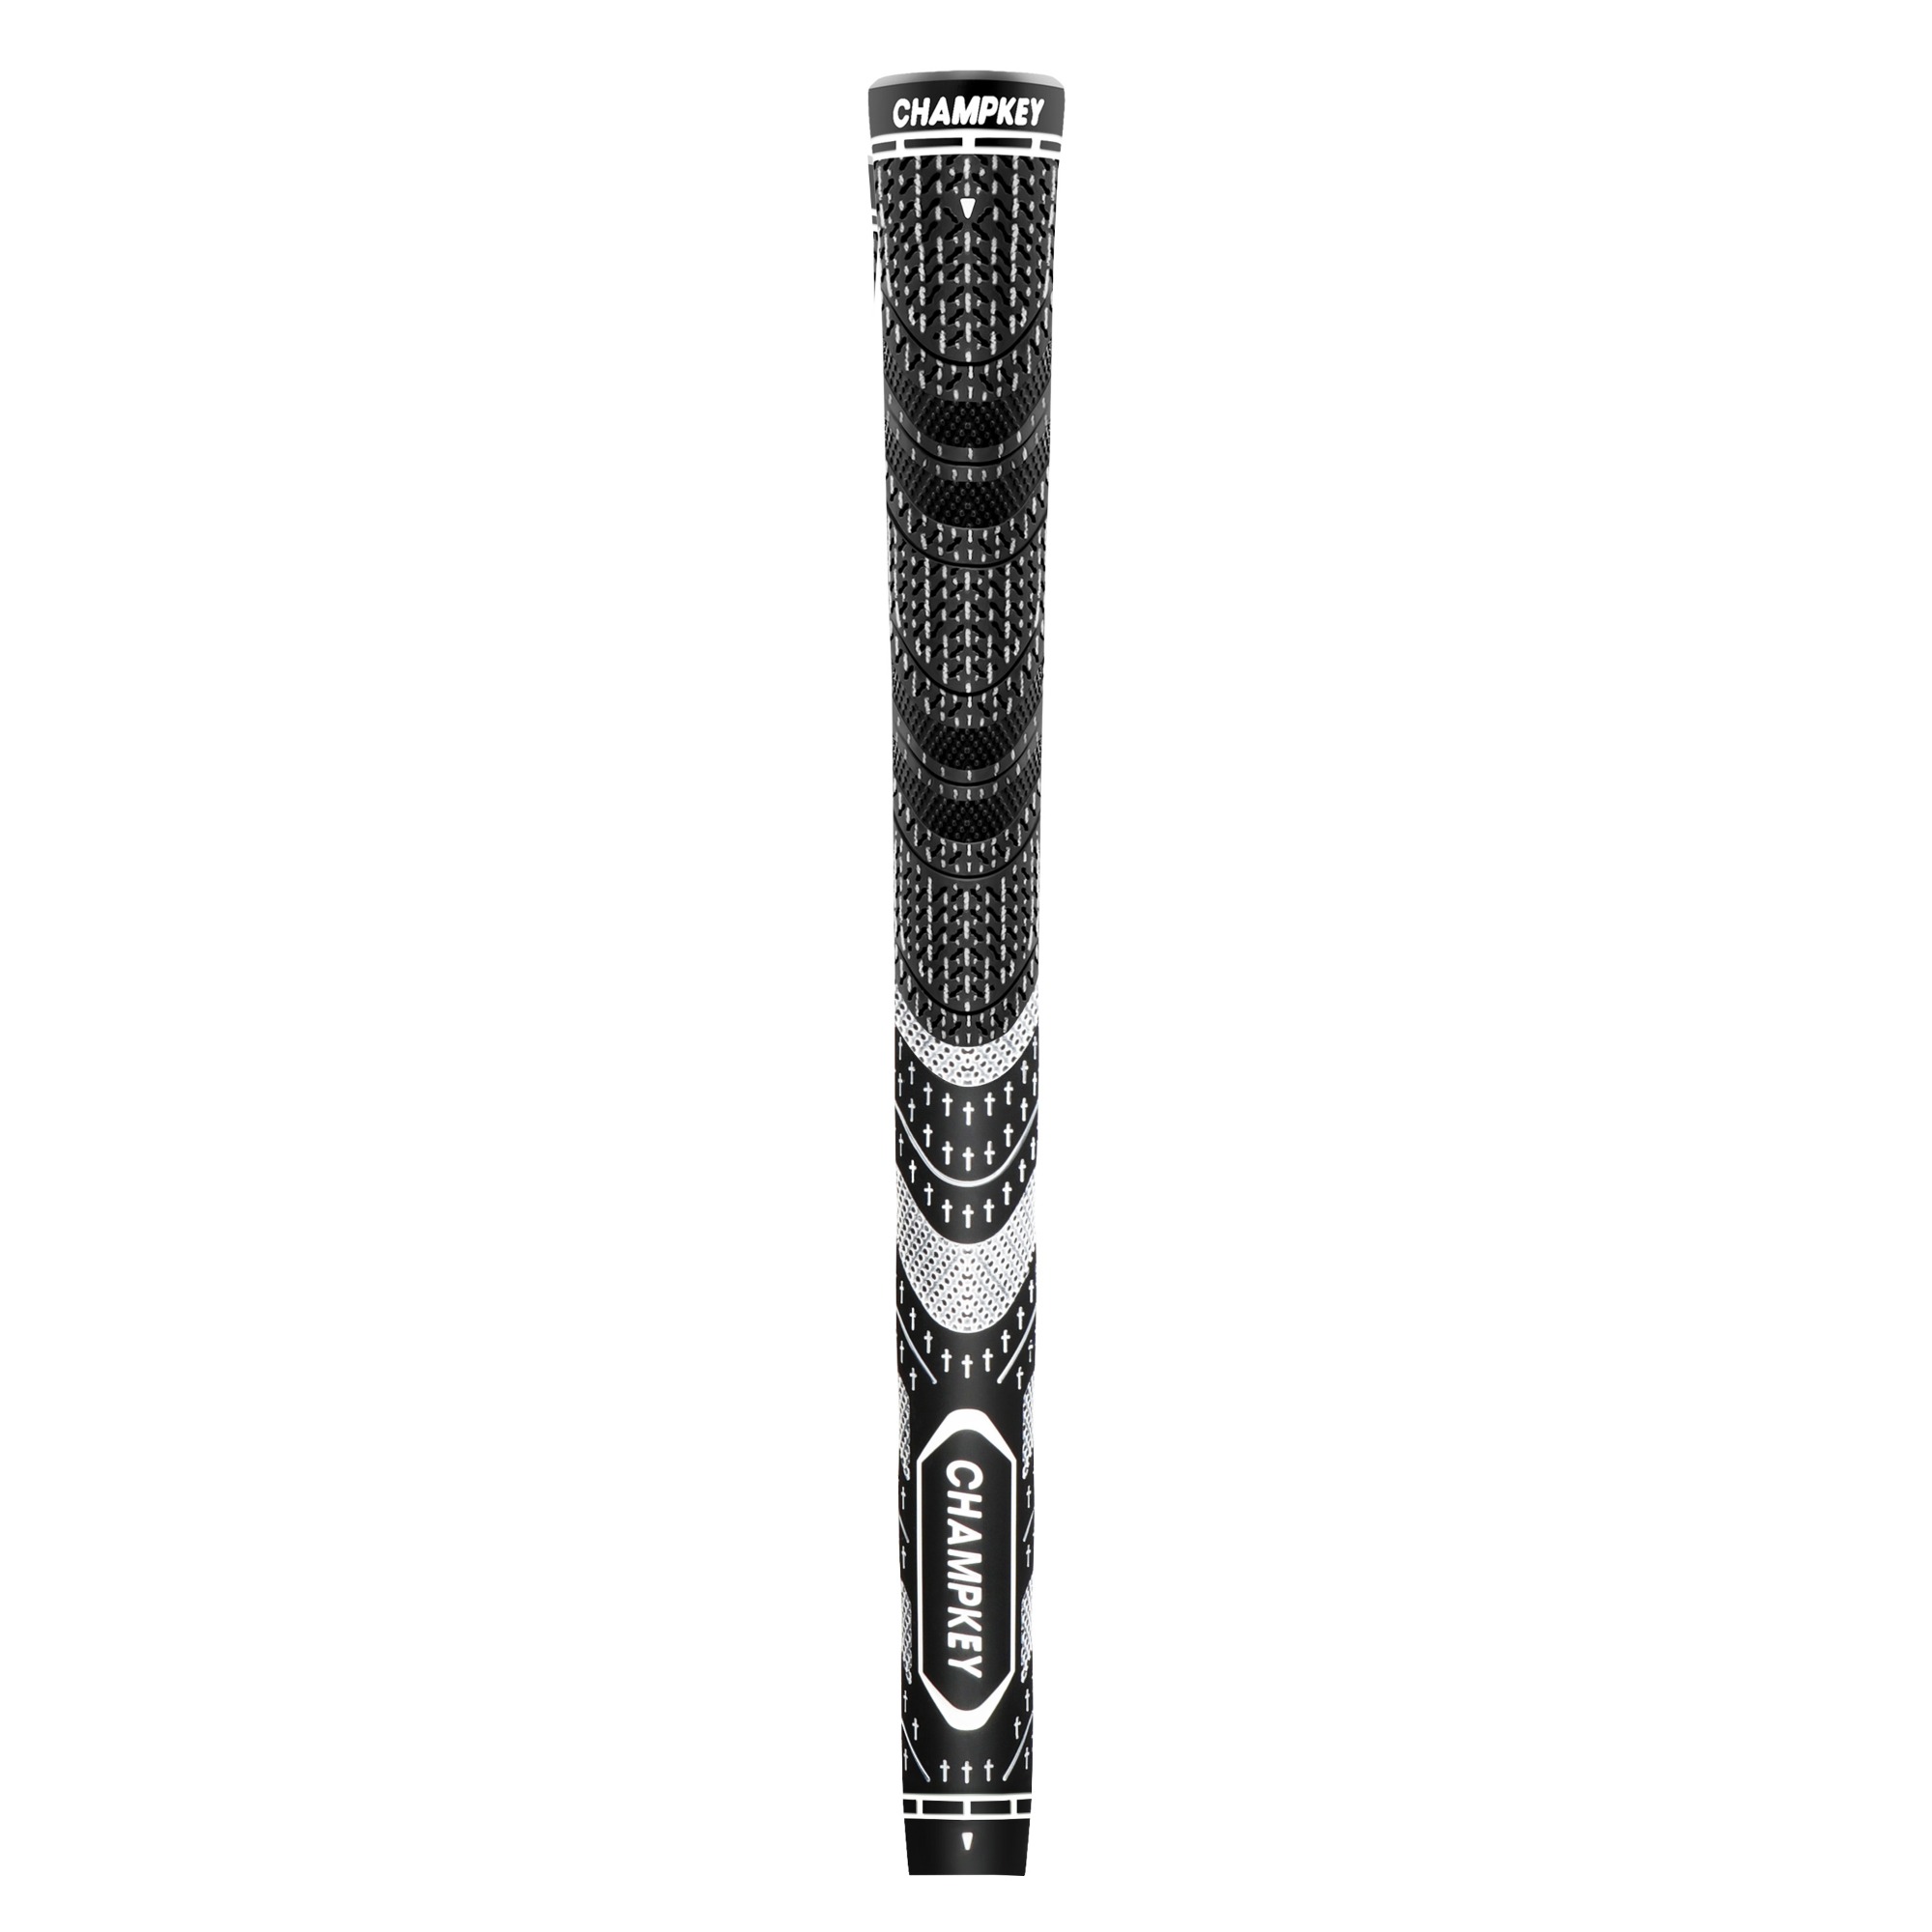 Champkey Traction-X Golf Grips 13 Pack | Come with Solvent,15 Tapes ...